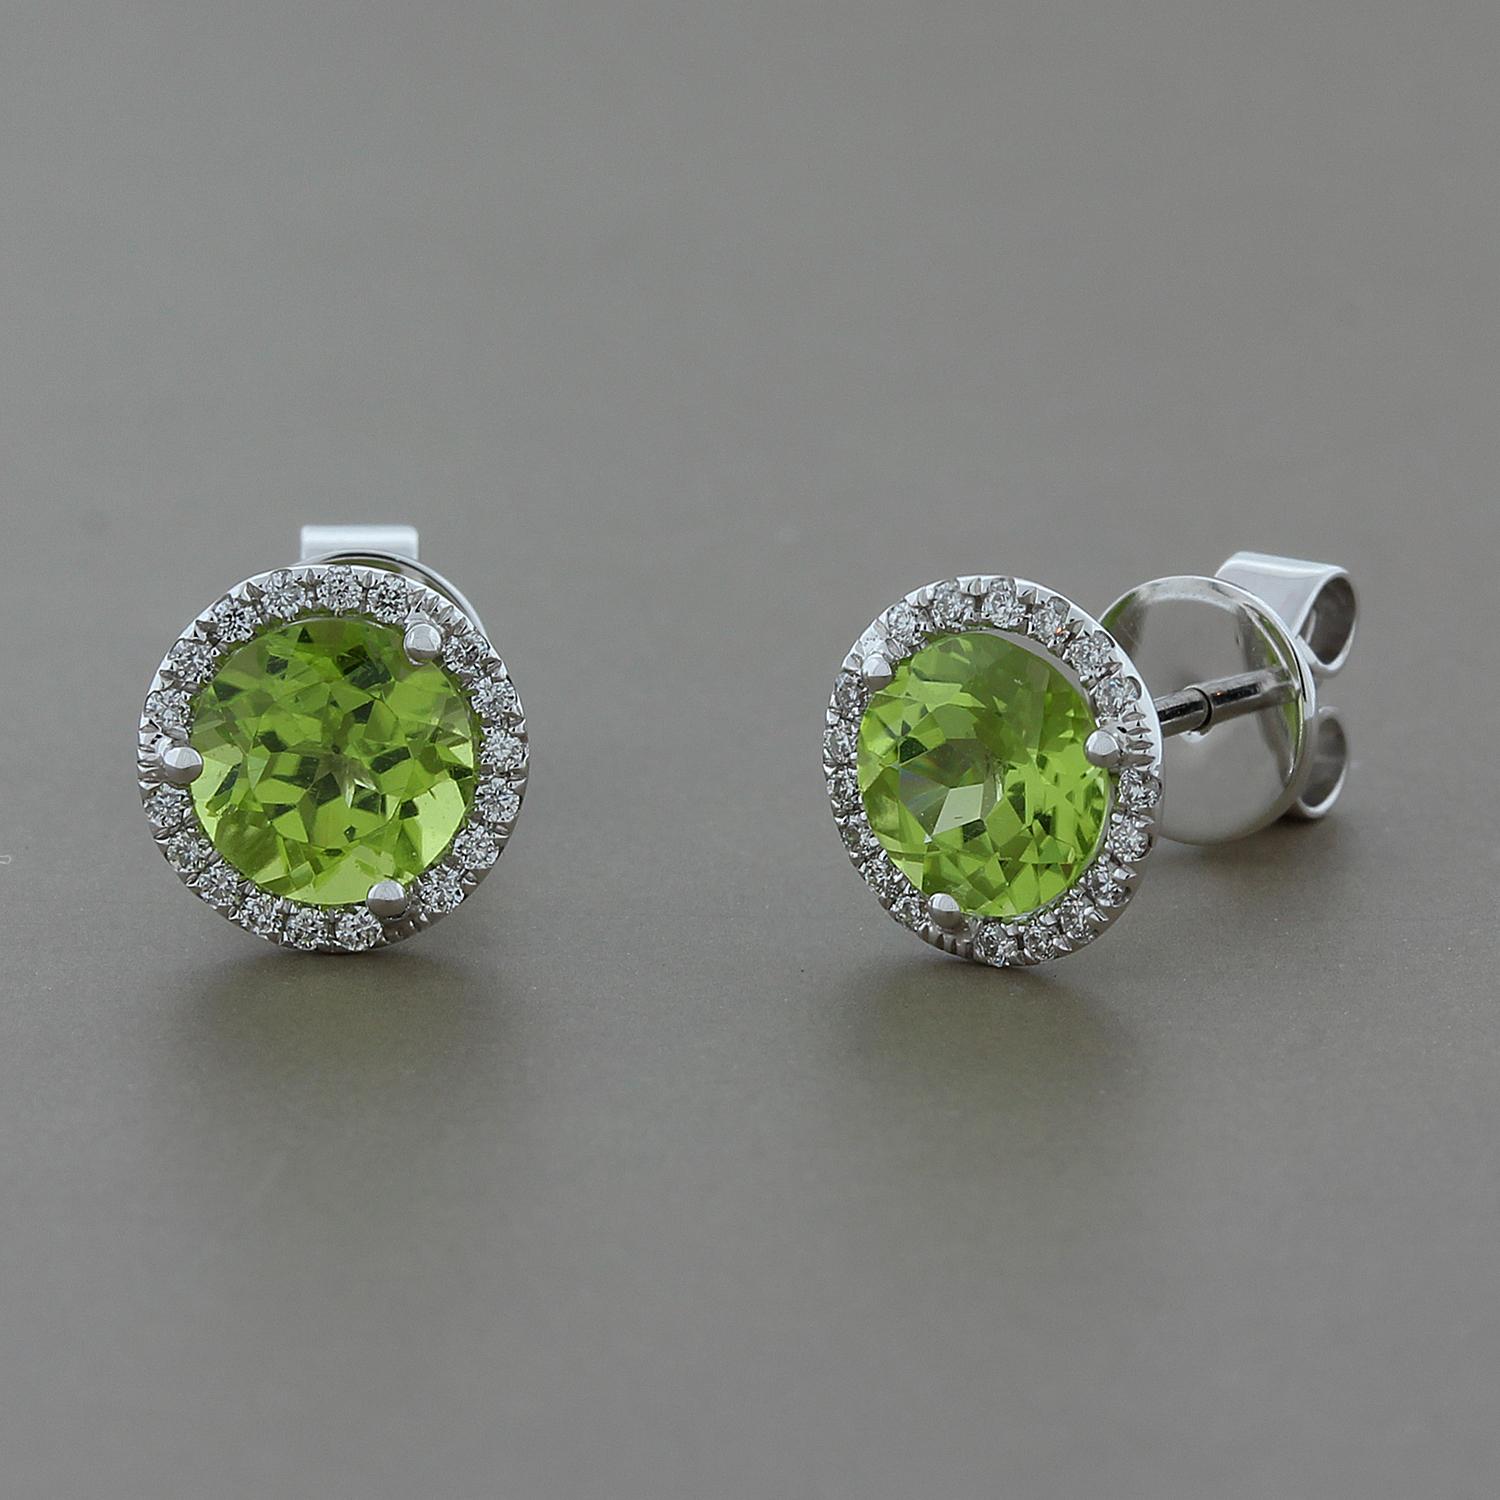 The perfect everyday stud earrings featuring 1.78 carats of round lime green peridot, in a classic halo of 0.16 carats of VS quality round white diamonds. Set in 18K white gold.

Approximately, 8 mm diameter
